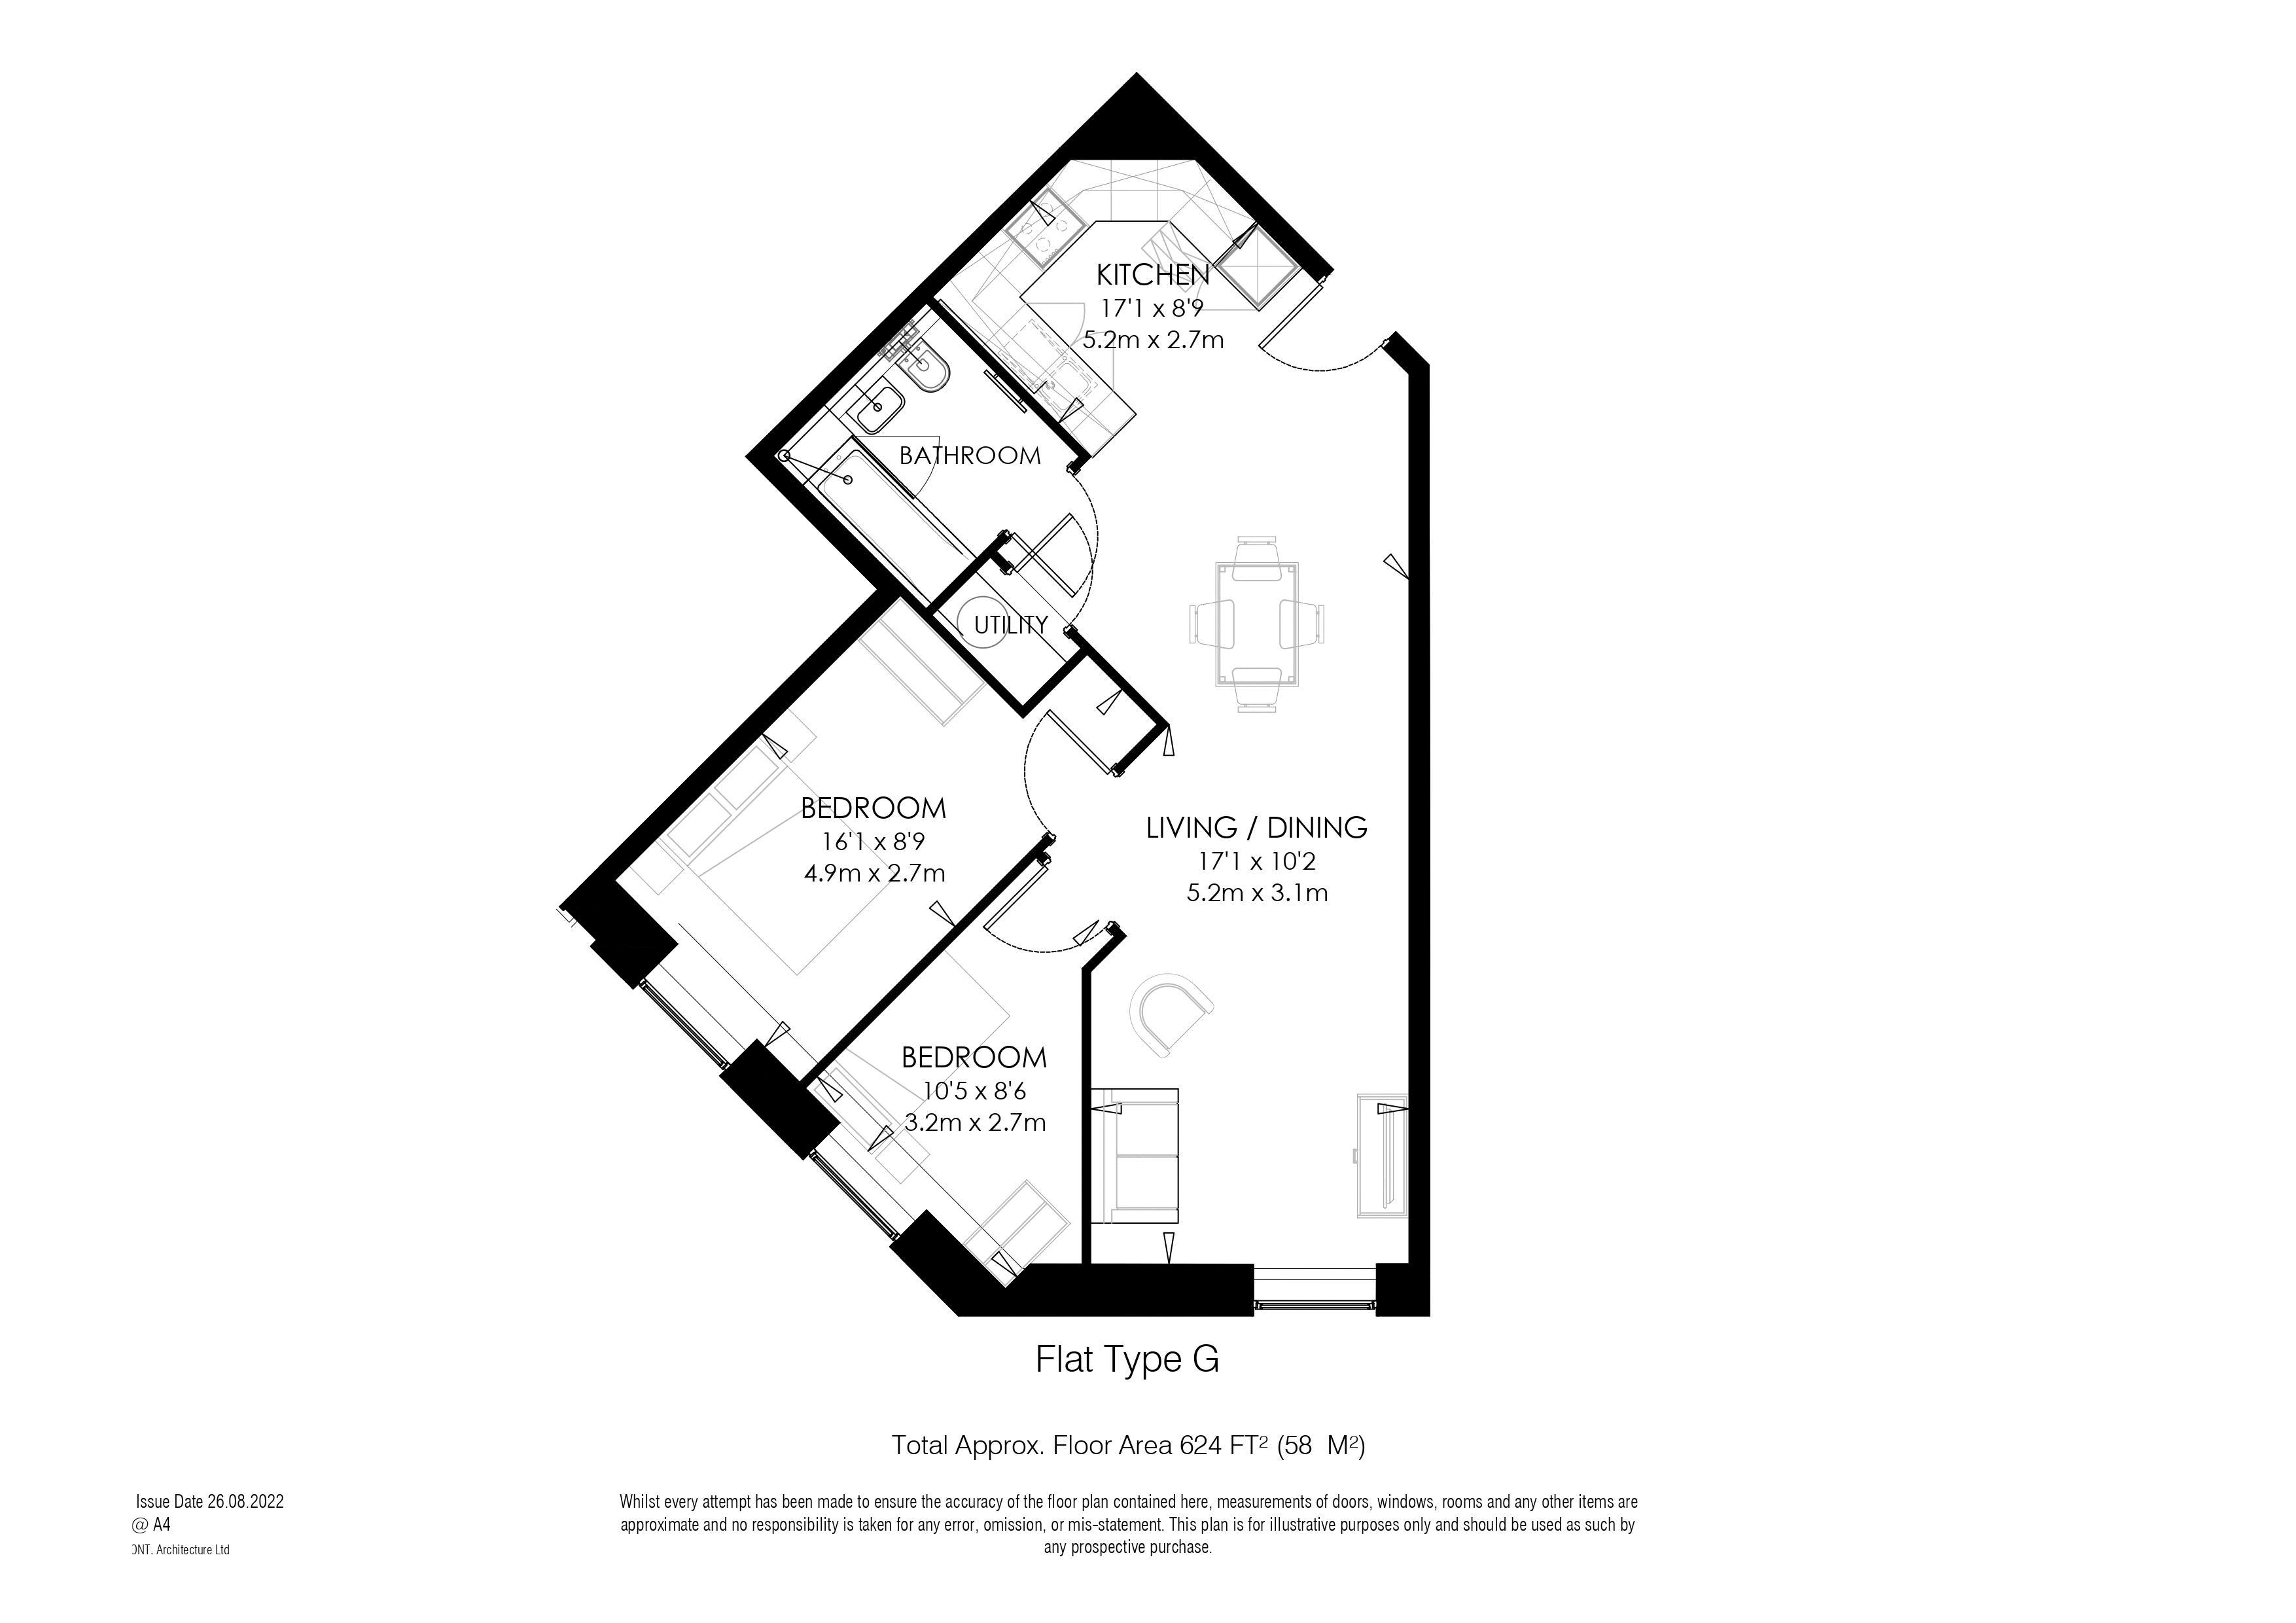 2 bed to rent in Chatham Maritime, Chatham - Property Floorplan